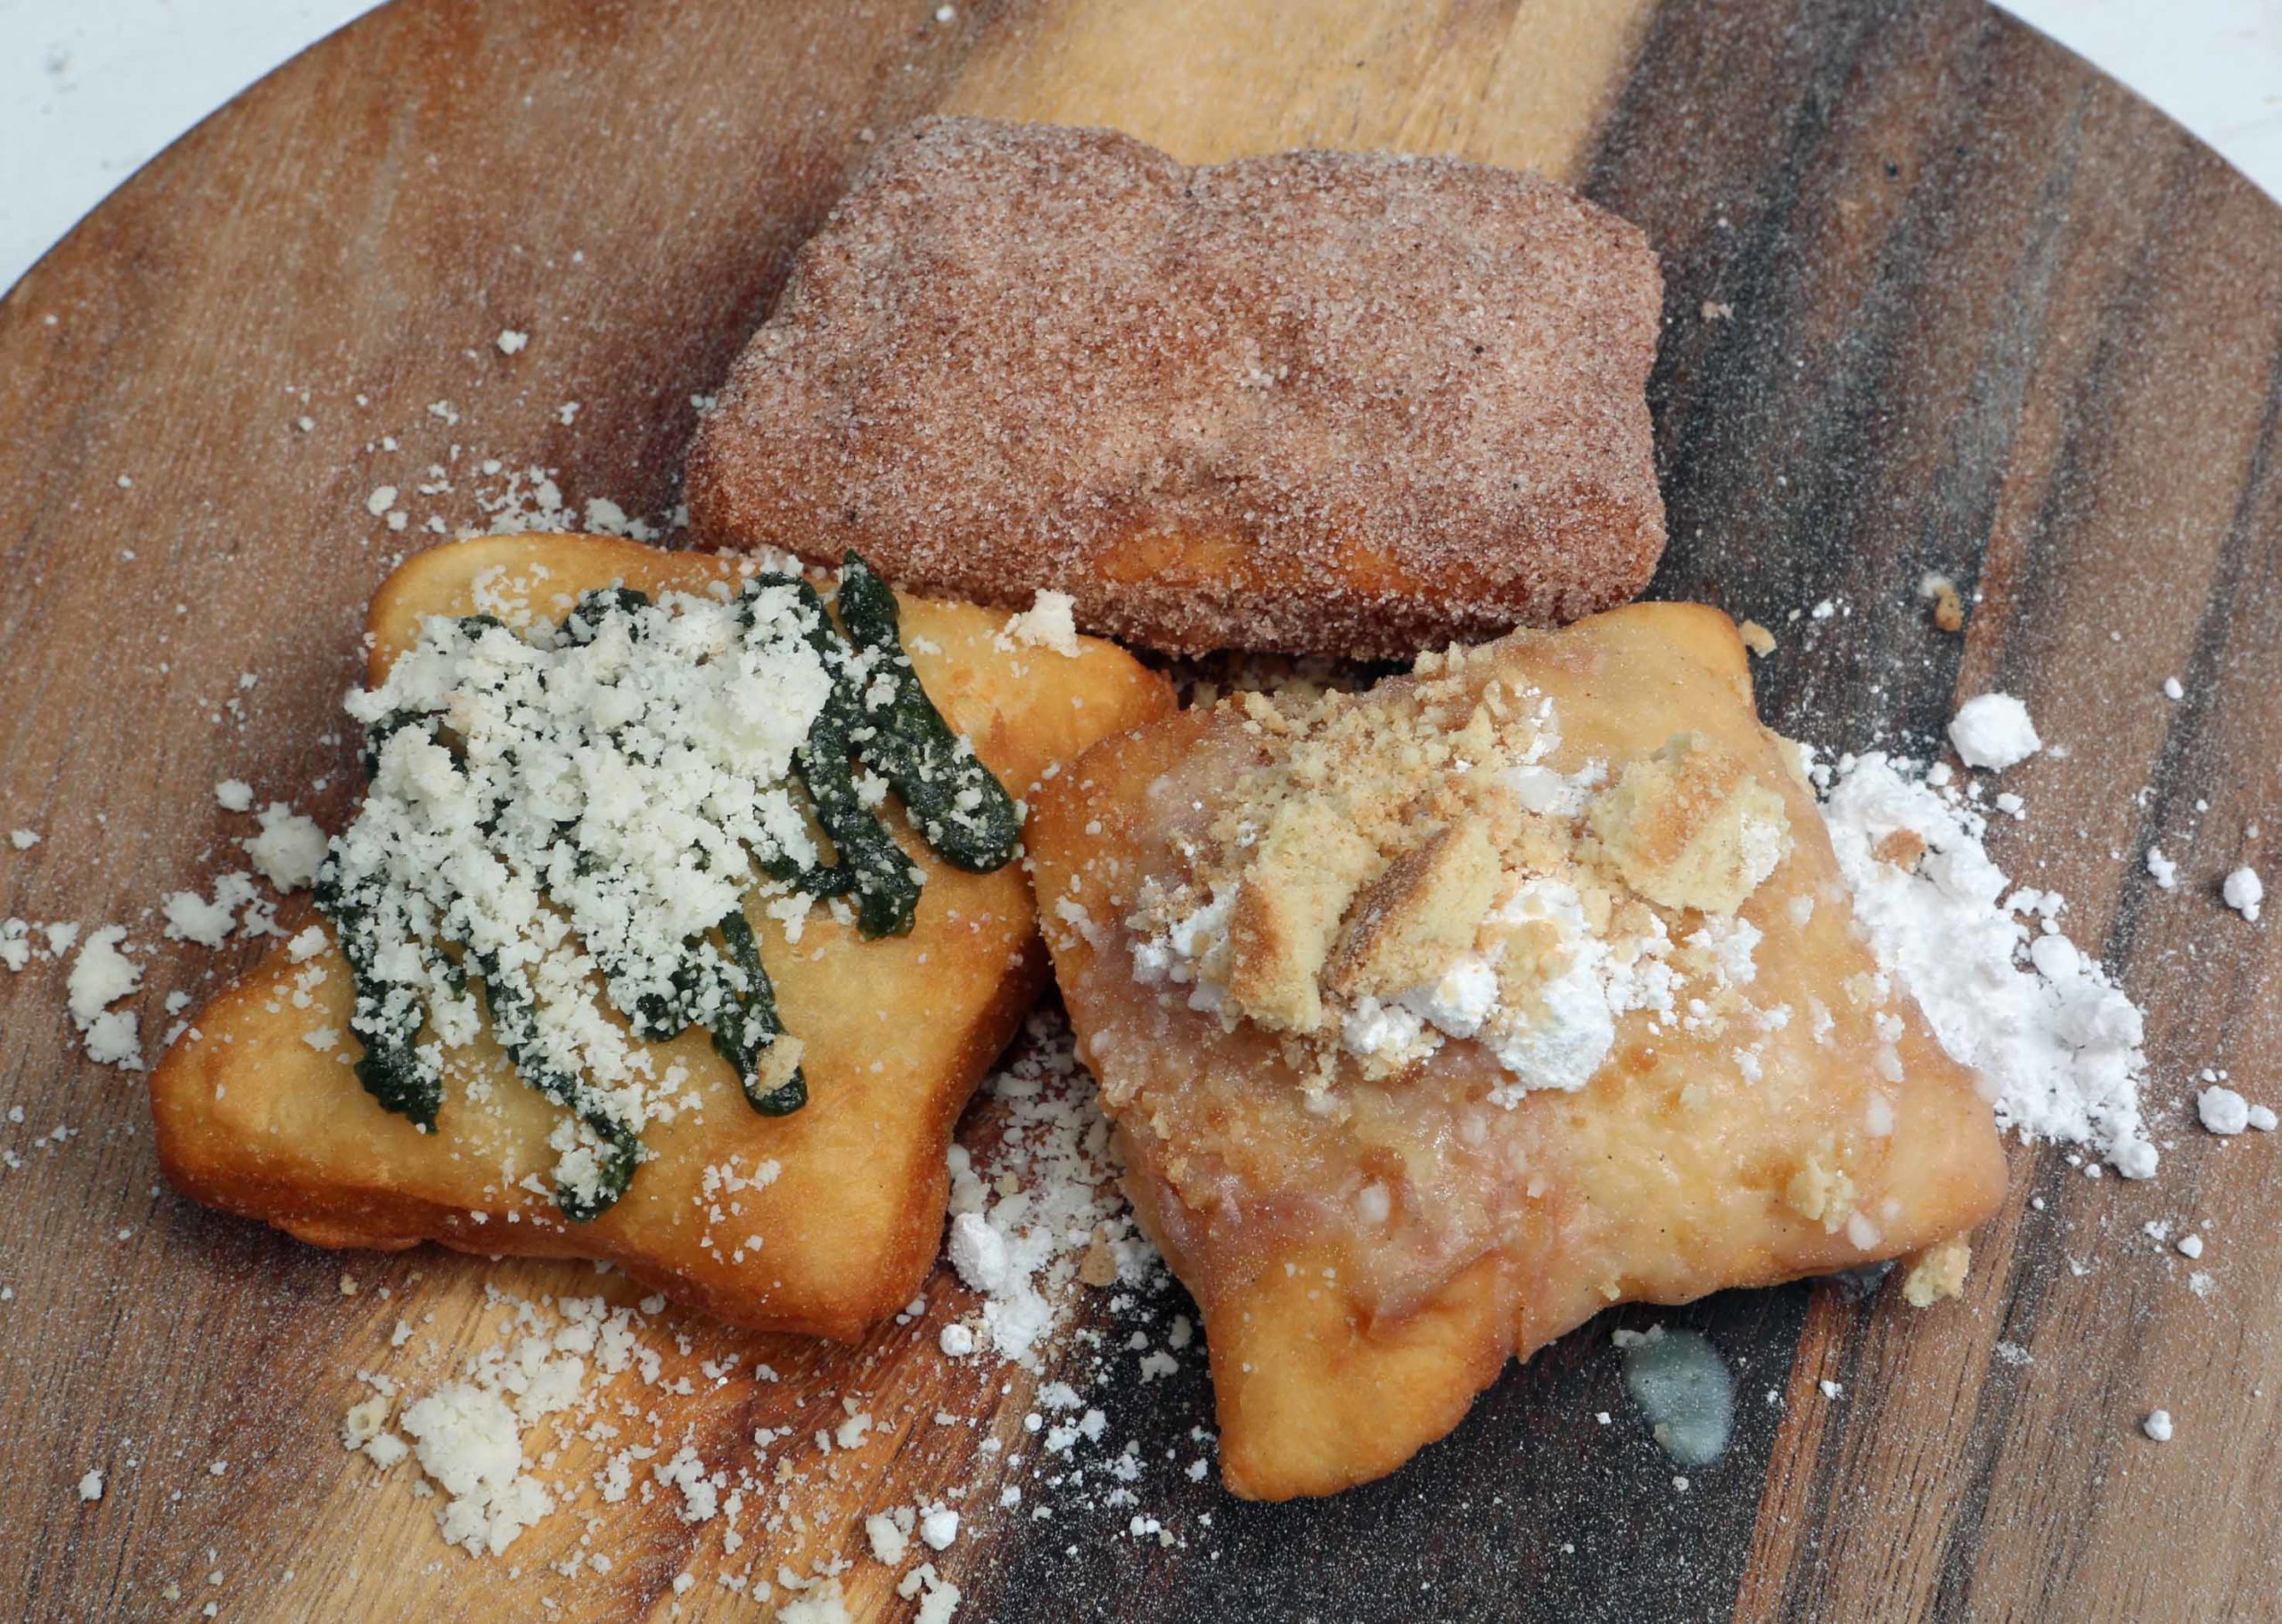 A trio of beignets (clockwise from left) Cilantro Pesto, Churro and Banana Pudding beignets courtesy of Southern Grit Flavor during the Beignet Festival at the City Park Festival Grounds in New Orleans on Saturday, October 6, 2018.  (Photo by Peter G. Forest)  Instagram:  @forestphoto_llc